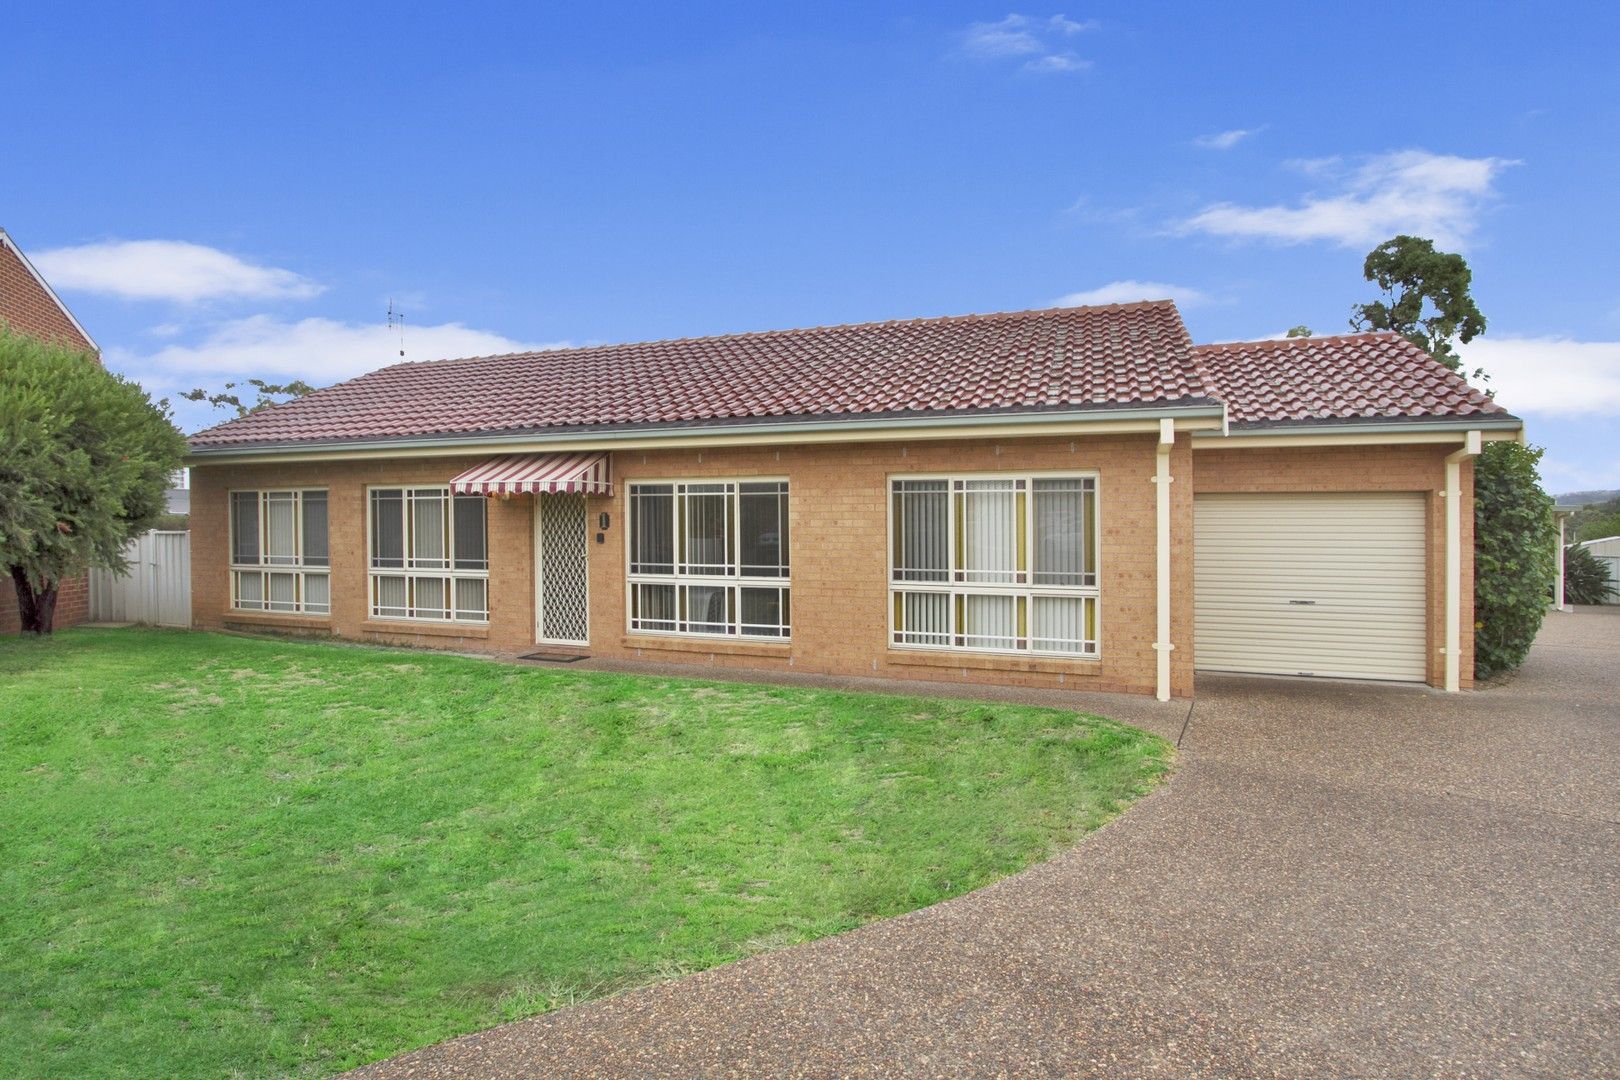 3 bedrooms Apartment / Unit / Flat in 1/4 Gunn Place TAMWORTH NSW, 2340